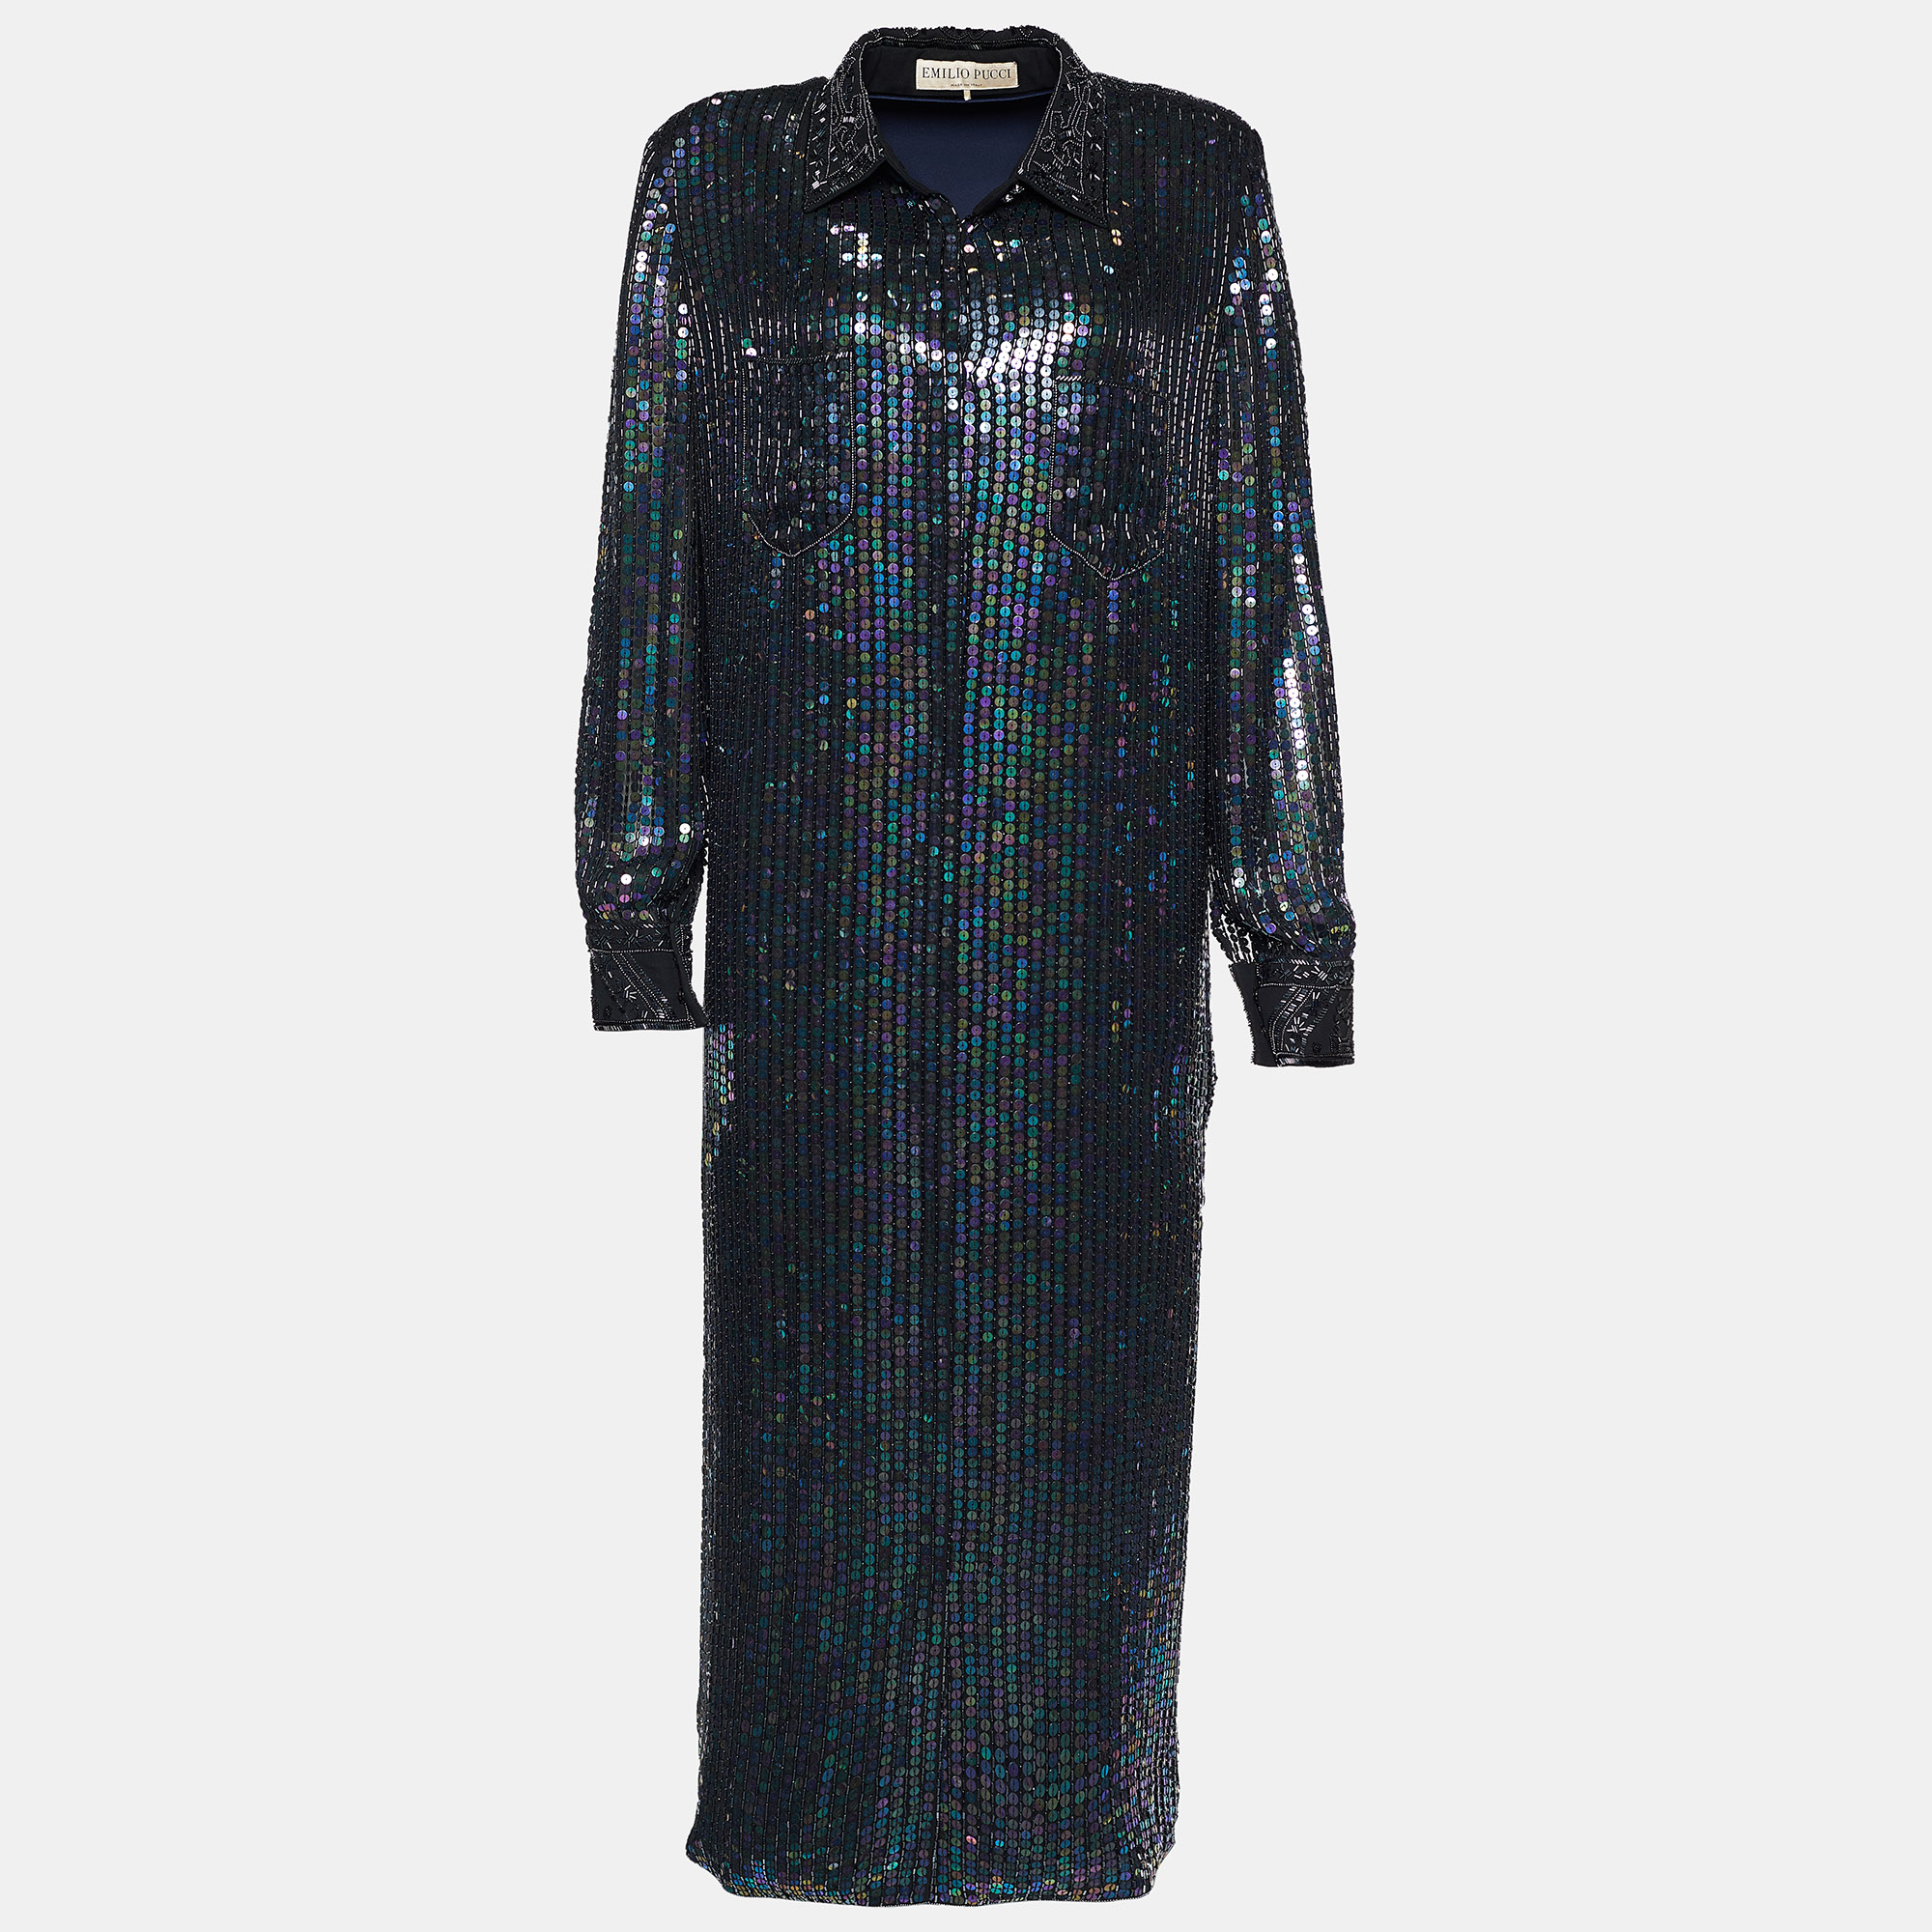 Pre-owned Emilio Pucci Metallic Sequin & Bead Embellished Silk Button Front Shirt Dress L